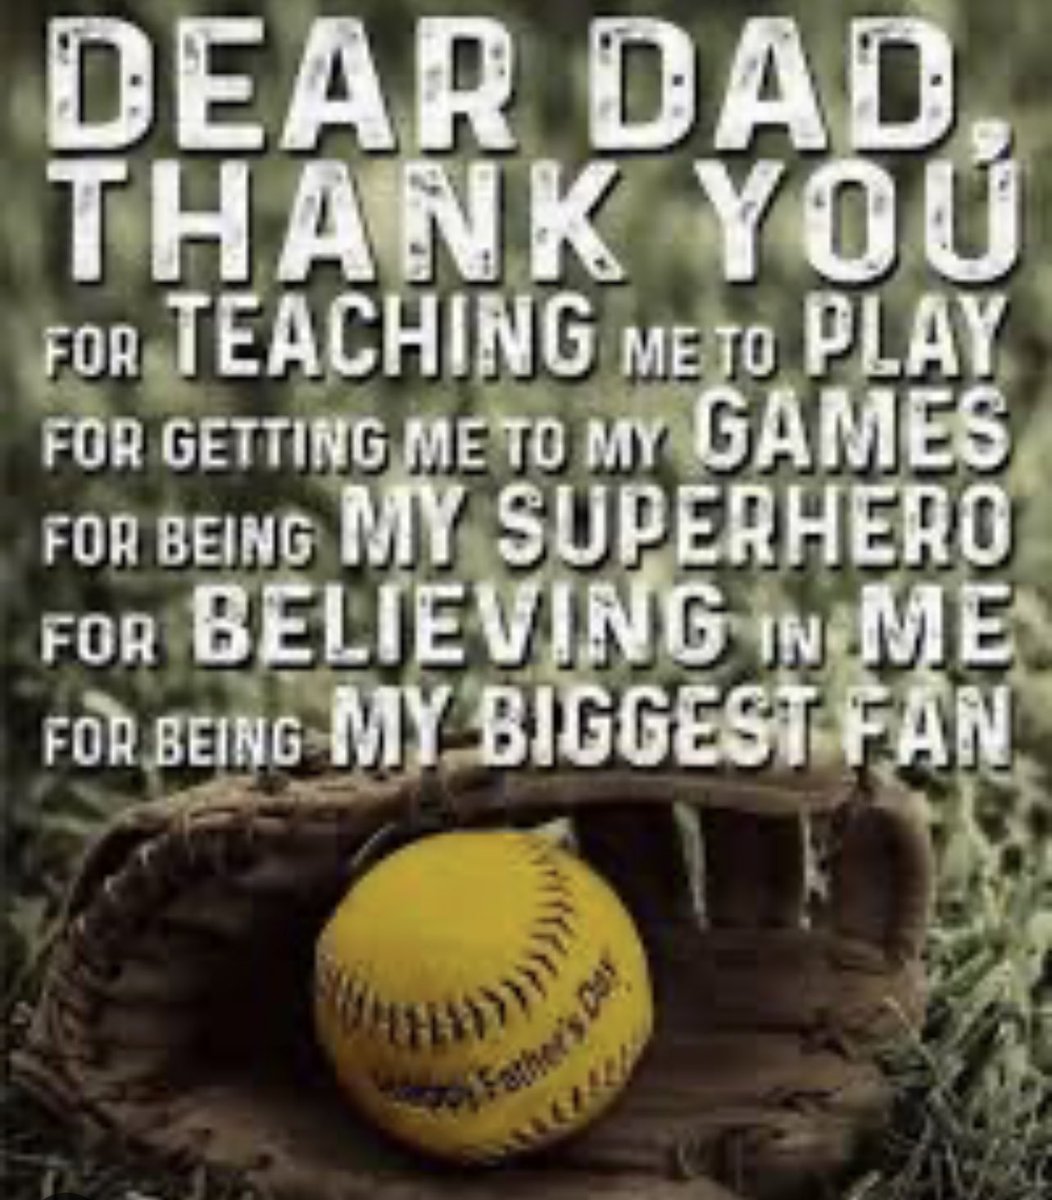 Happy Father’s Day!! Thank you to all the dads who are sharing their day with us today!!!! #softballdads #softballfamily #oneteamonefamily #lastdance